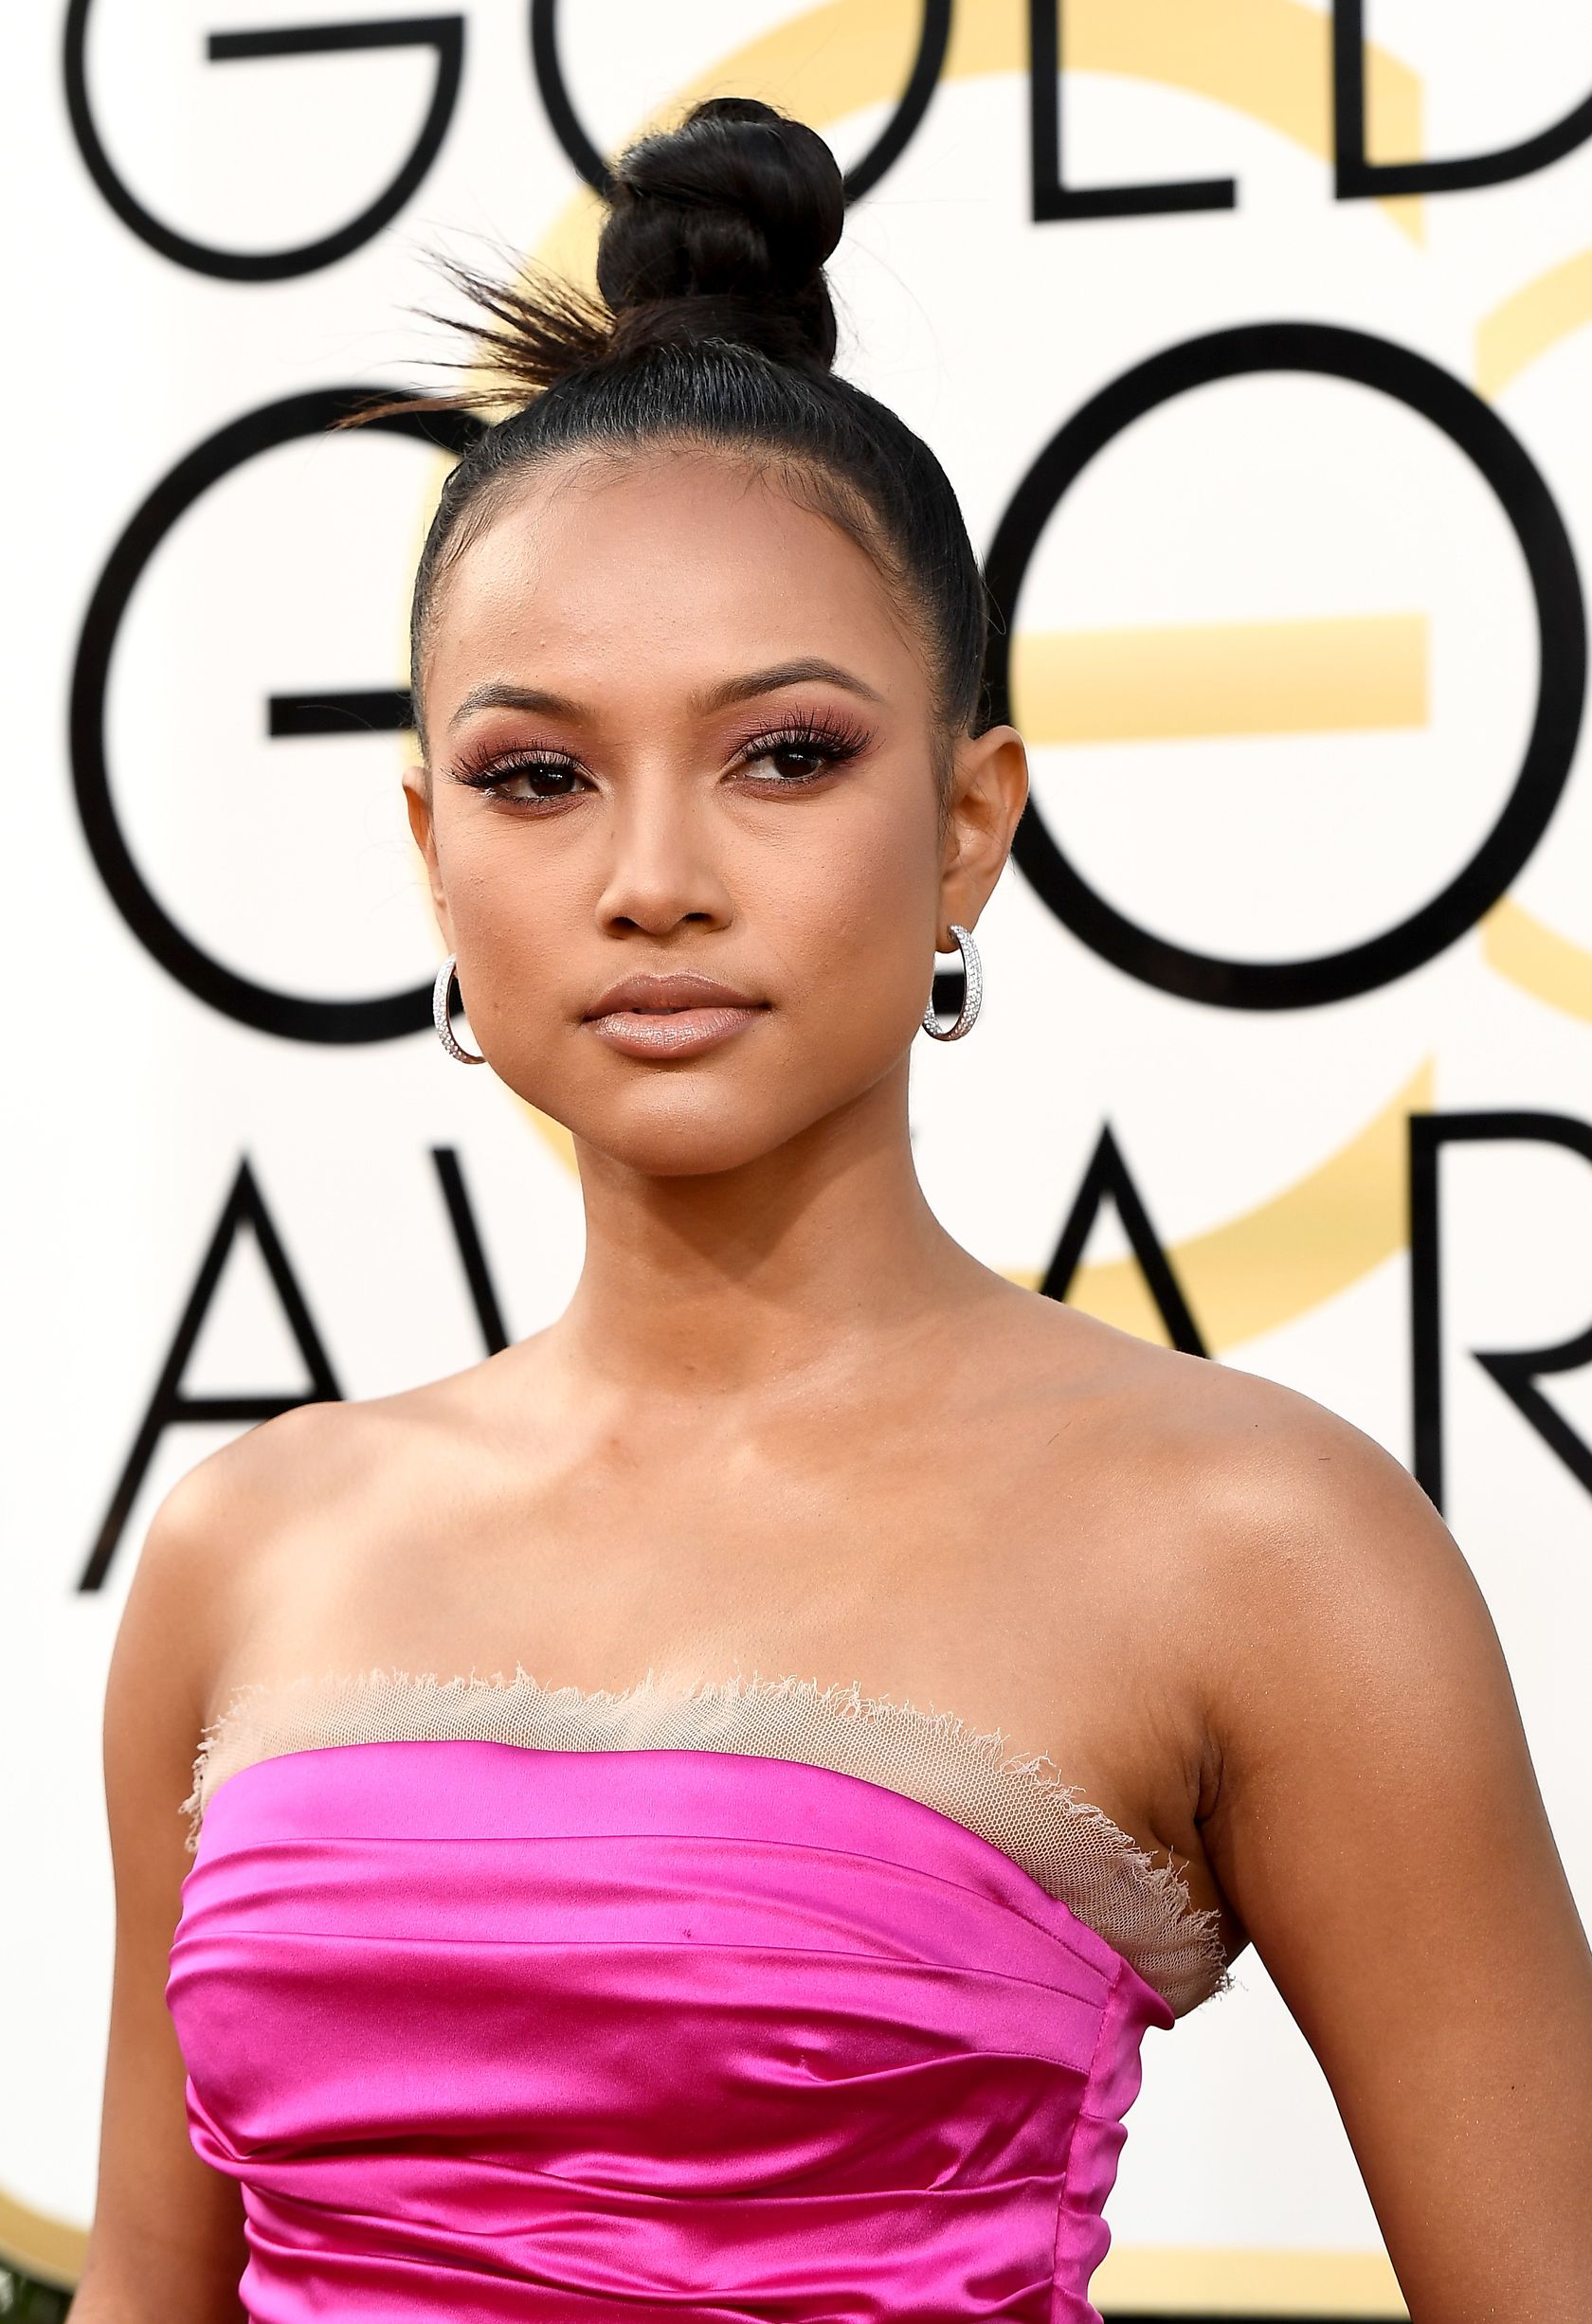 The 35-year old daughter of father Devon Minters and mother Cindy Adamson Karrueche Tran in 2024 photo. Karrueche Tran earned a  million dollar salary - leaving the net worth at 0.9 million in 2024